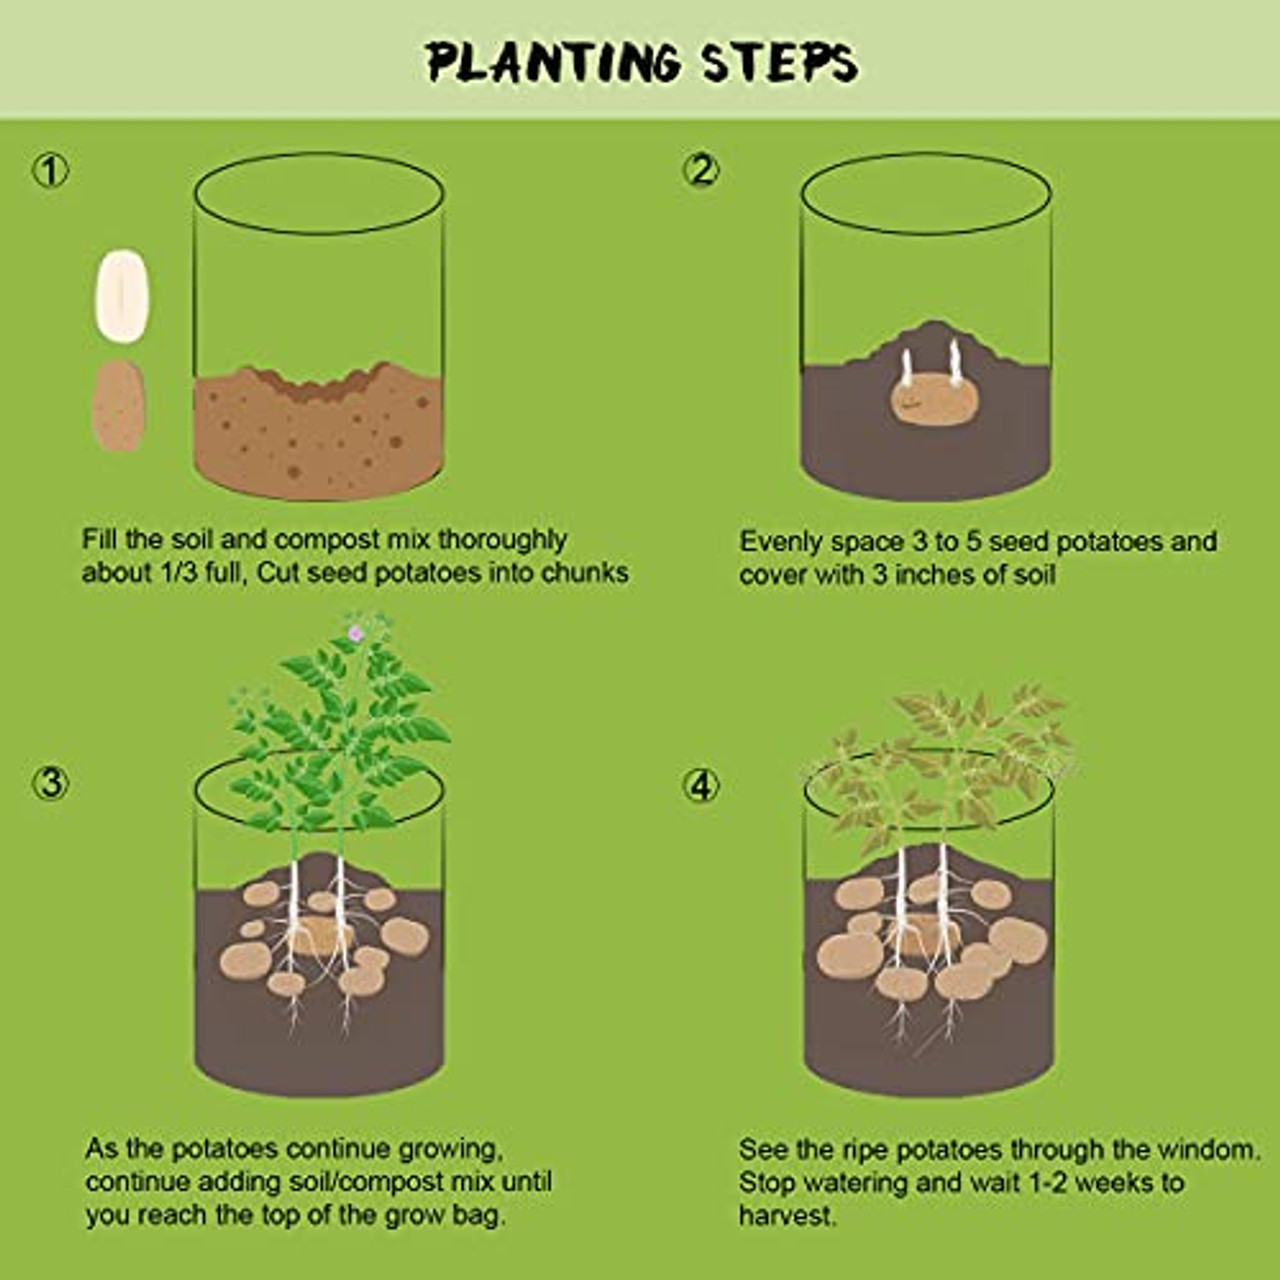 Grow Potatoes in a Bag - BloominThyme